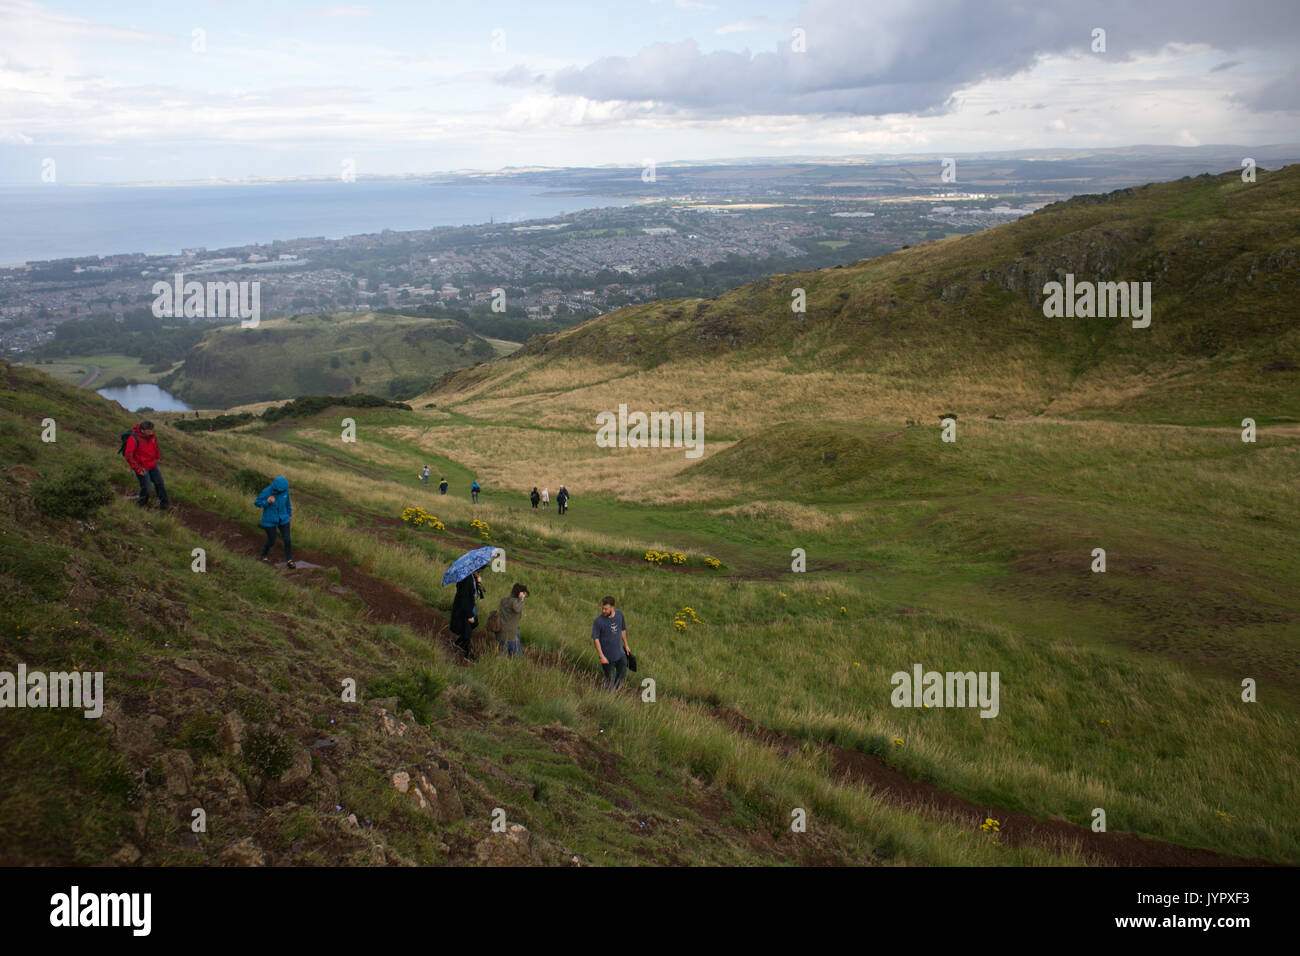 Walkers descending the peak. The peak of King Arthur's Seat is a popular destination for both locals and tourists. The peak and souronding rocky hills Stock Photo